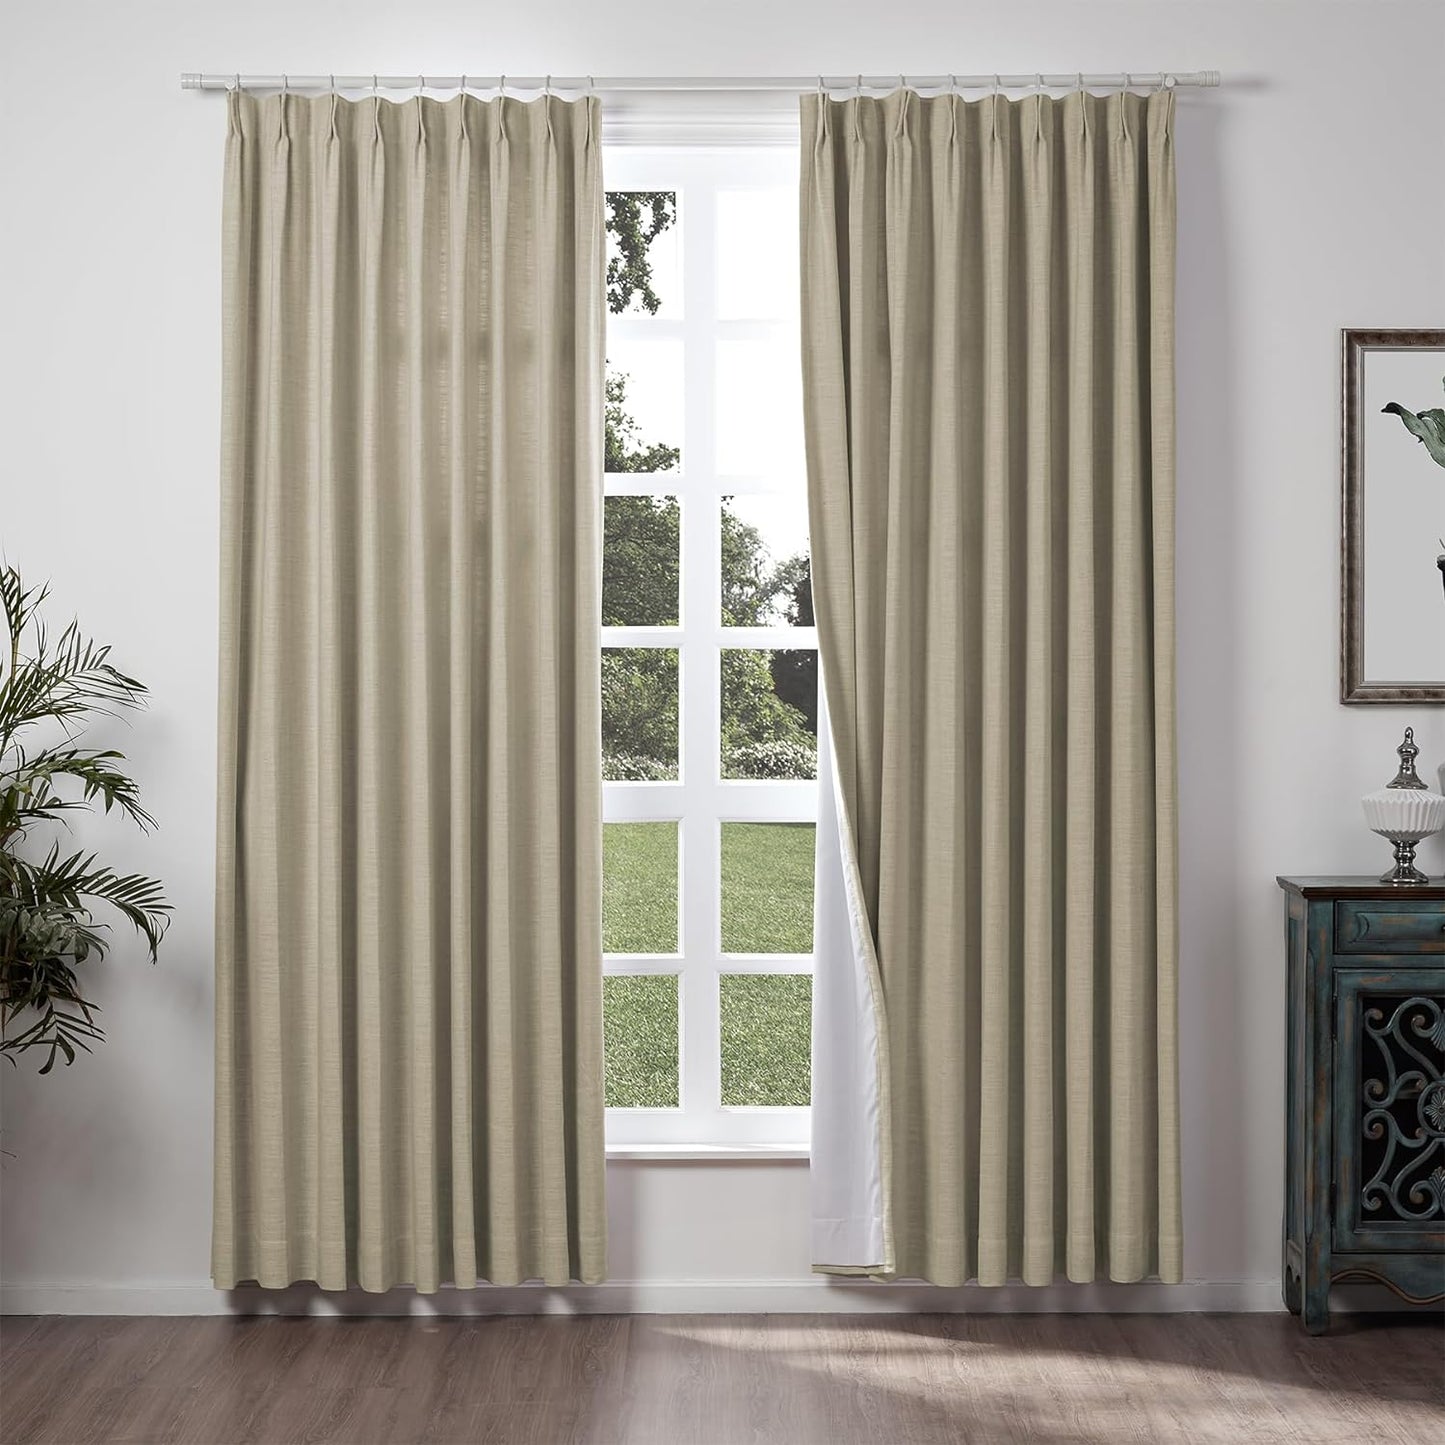 Chadmade 50" W X 84" L Polyester Linen Drape with Blackout Lining Pinch Pleat Curtain for Sliding Door Patio Door Living Room Bedroom, (1 Panel) Beige White Liz Collection  ChadMade Grey Beige (6) 100Wx84L 